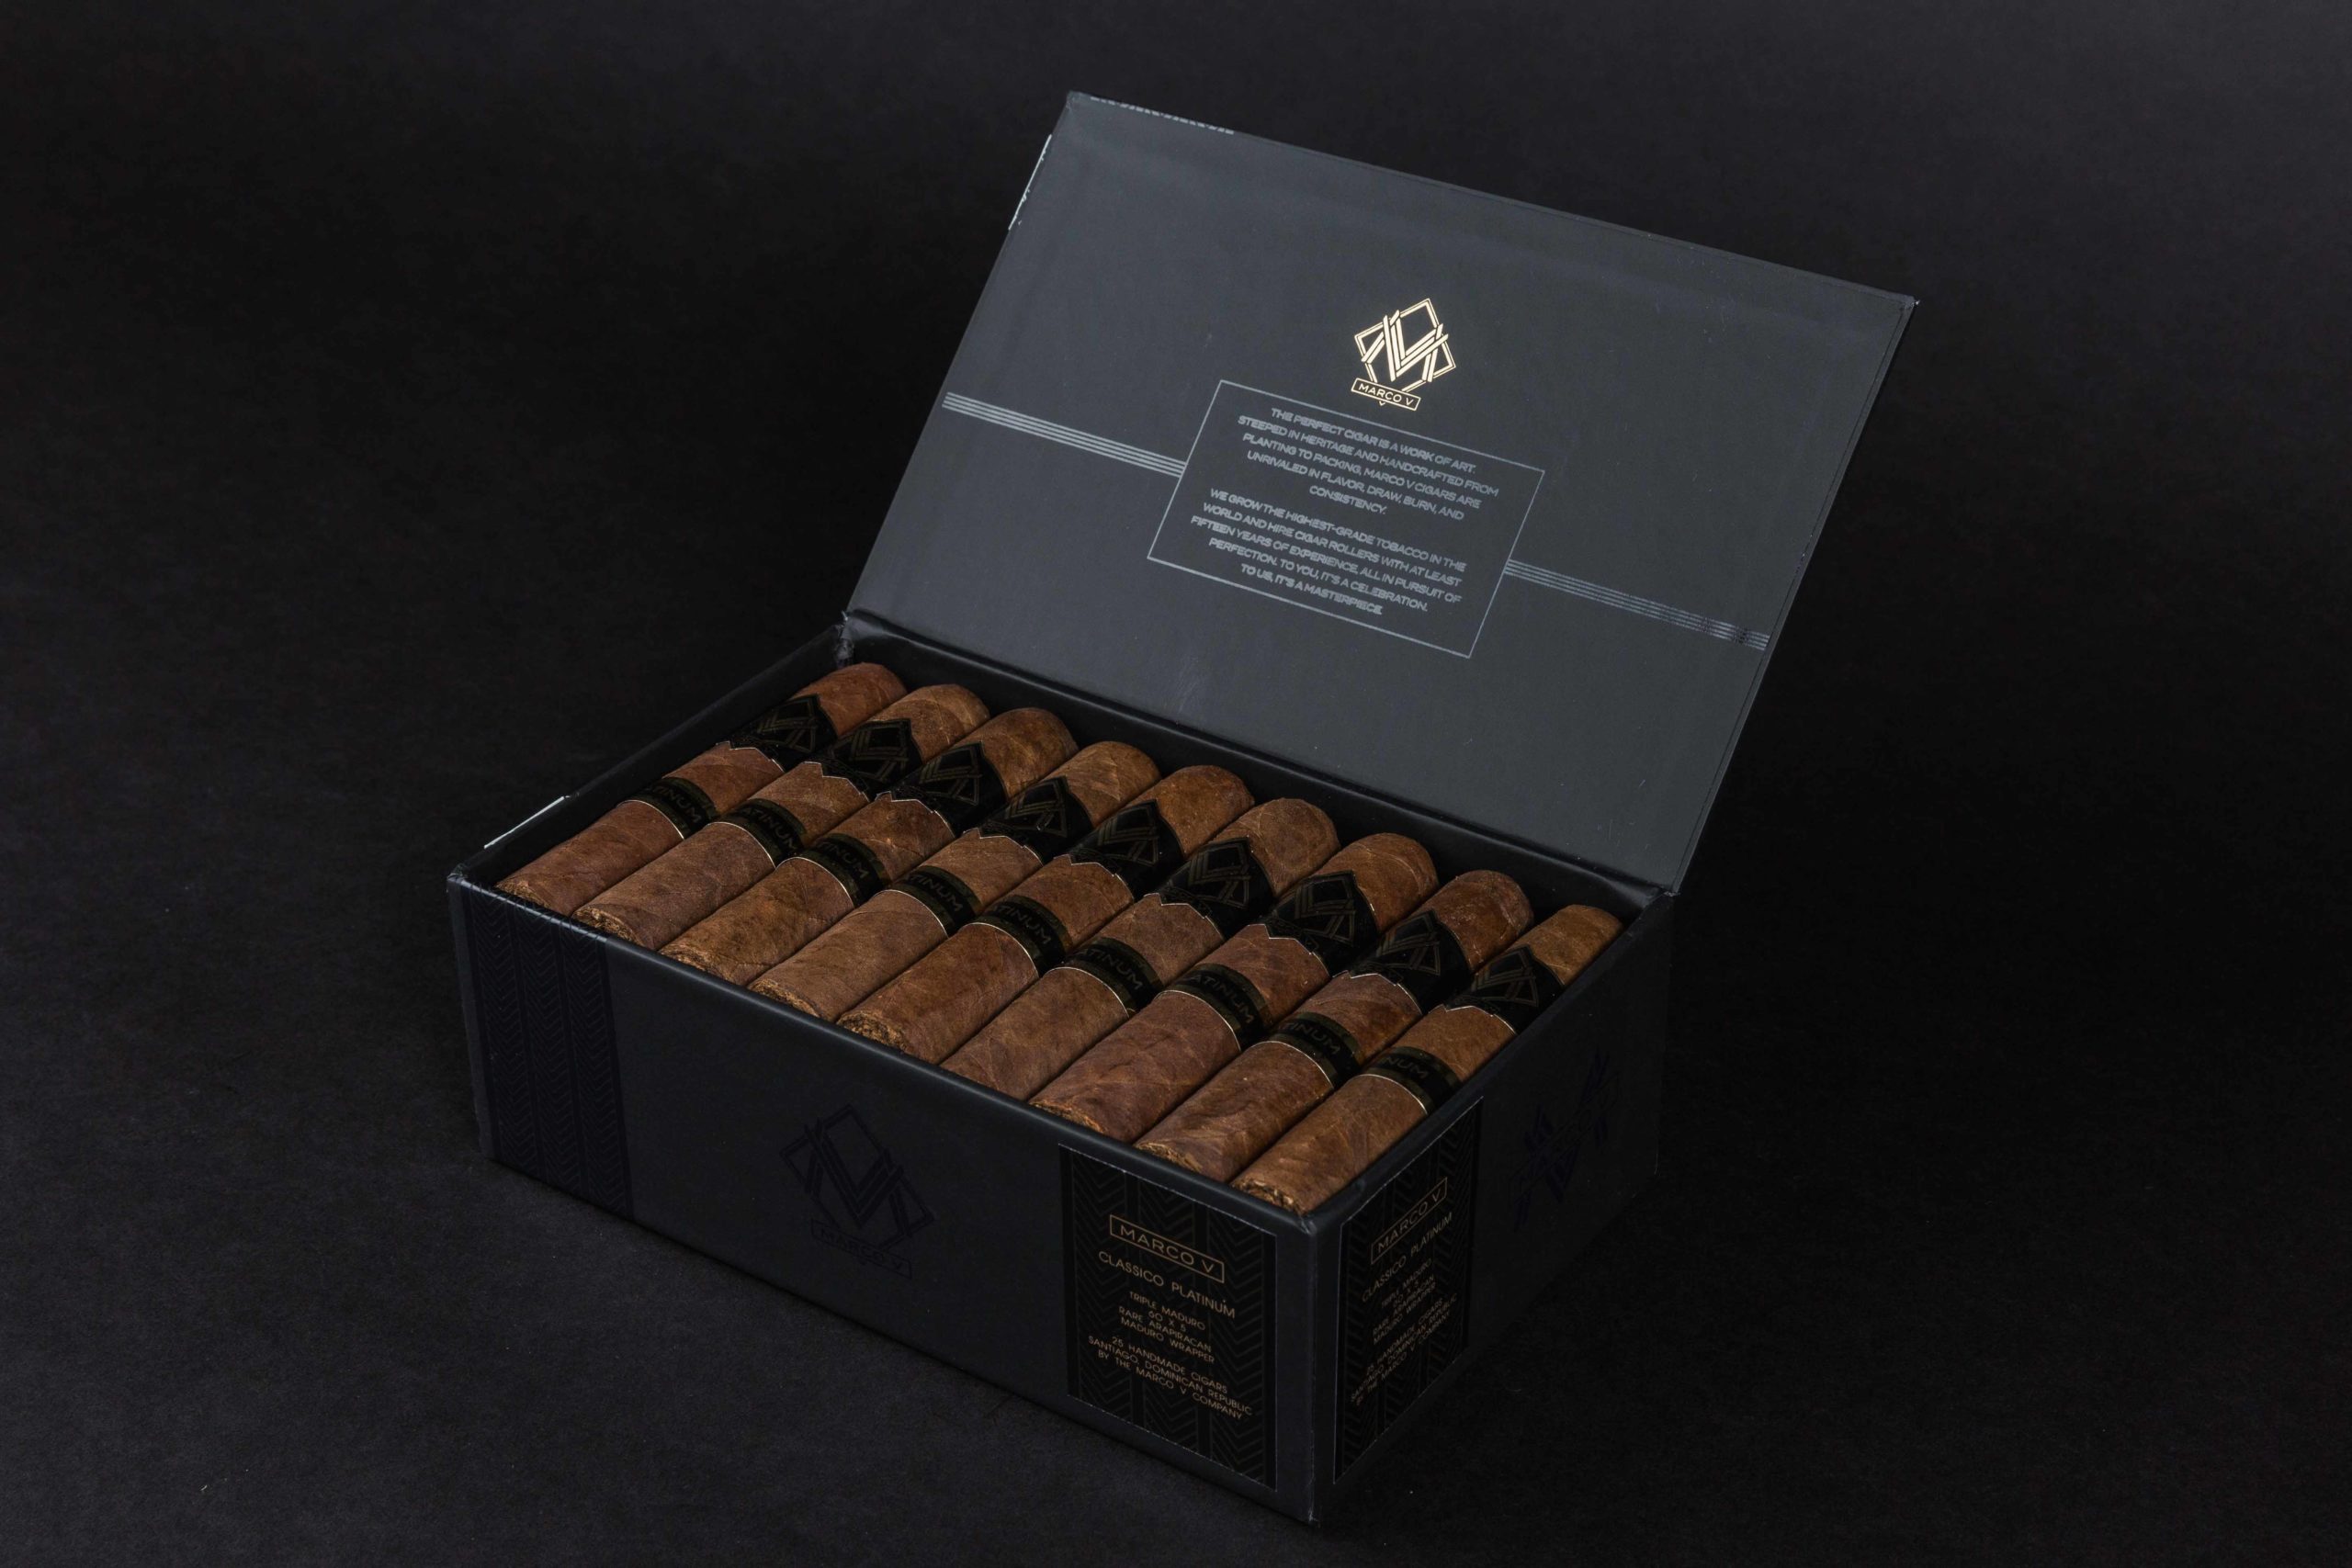 Marco V Cigars | Edition Studios | Projects